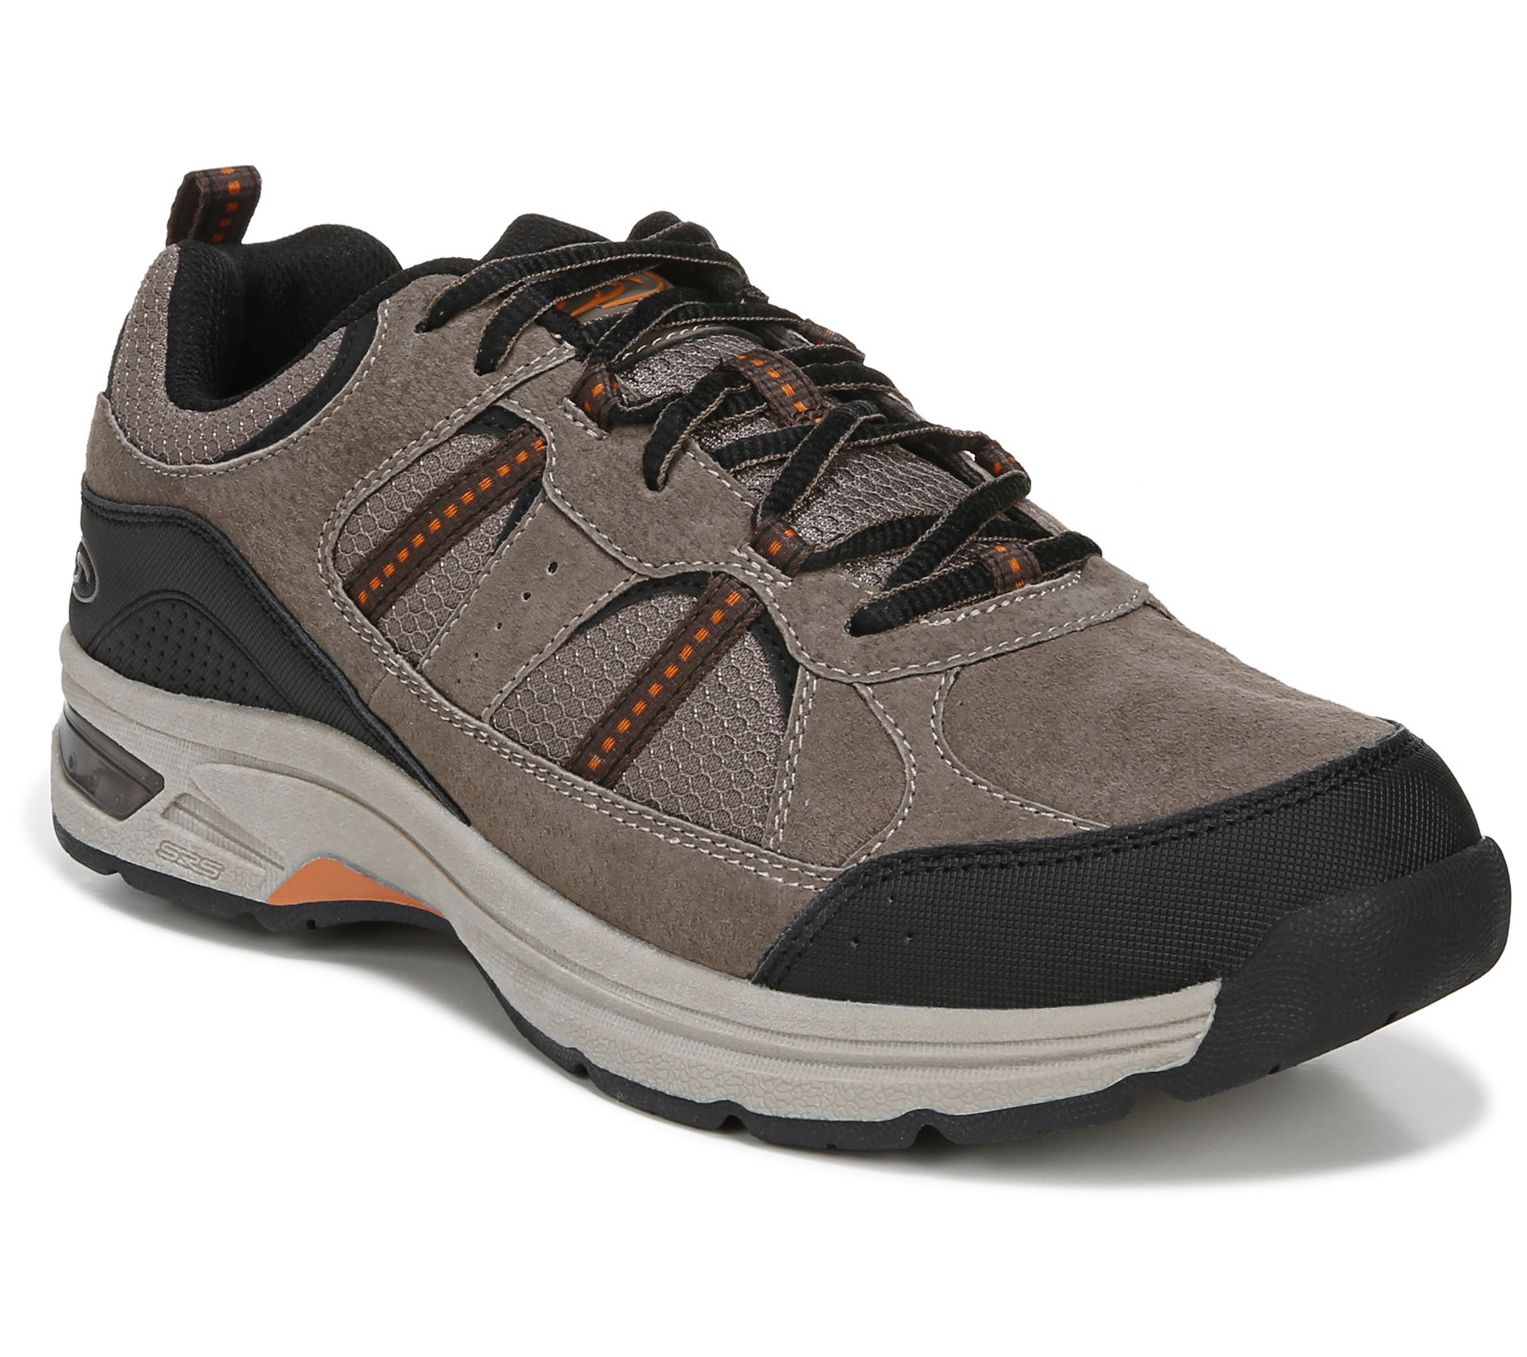 Dr. Scholl's Men's Suede Athletic Sneakers - Crossover - QVC.com